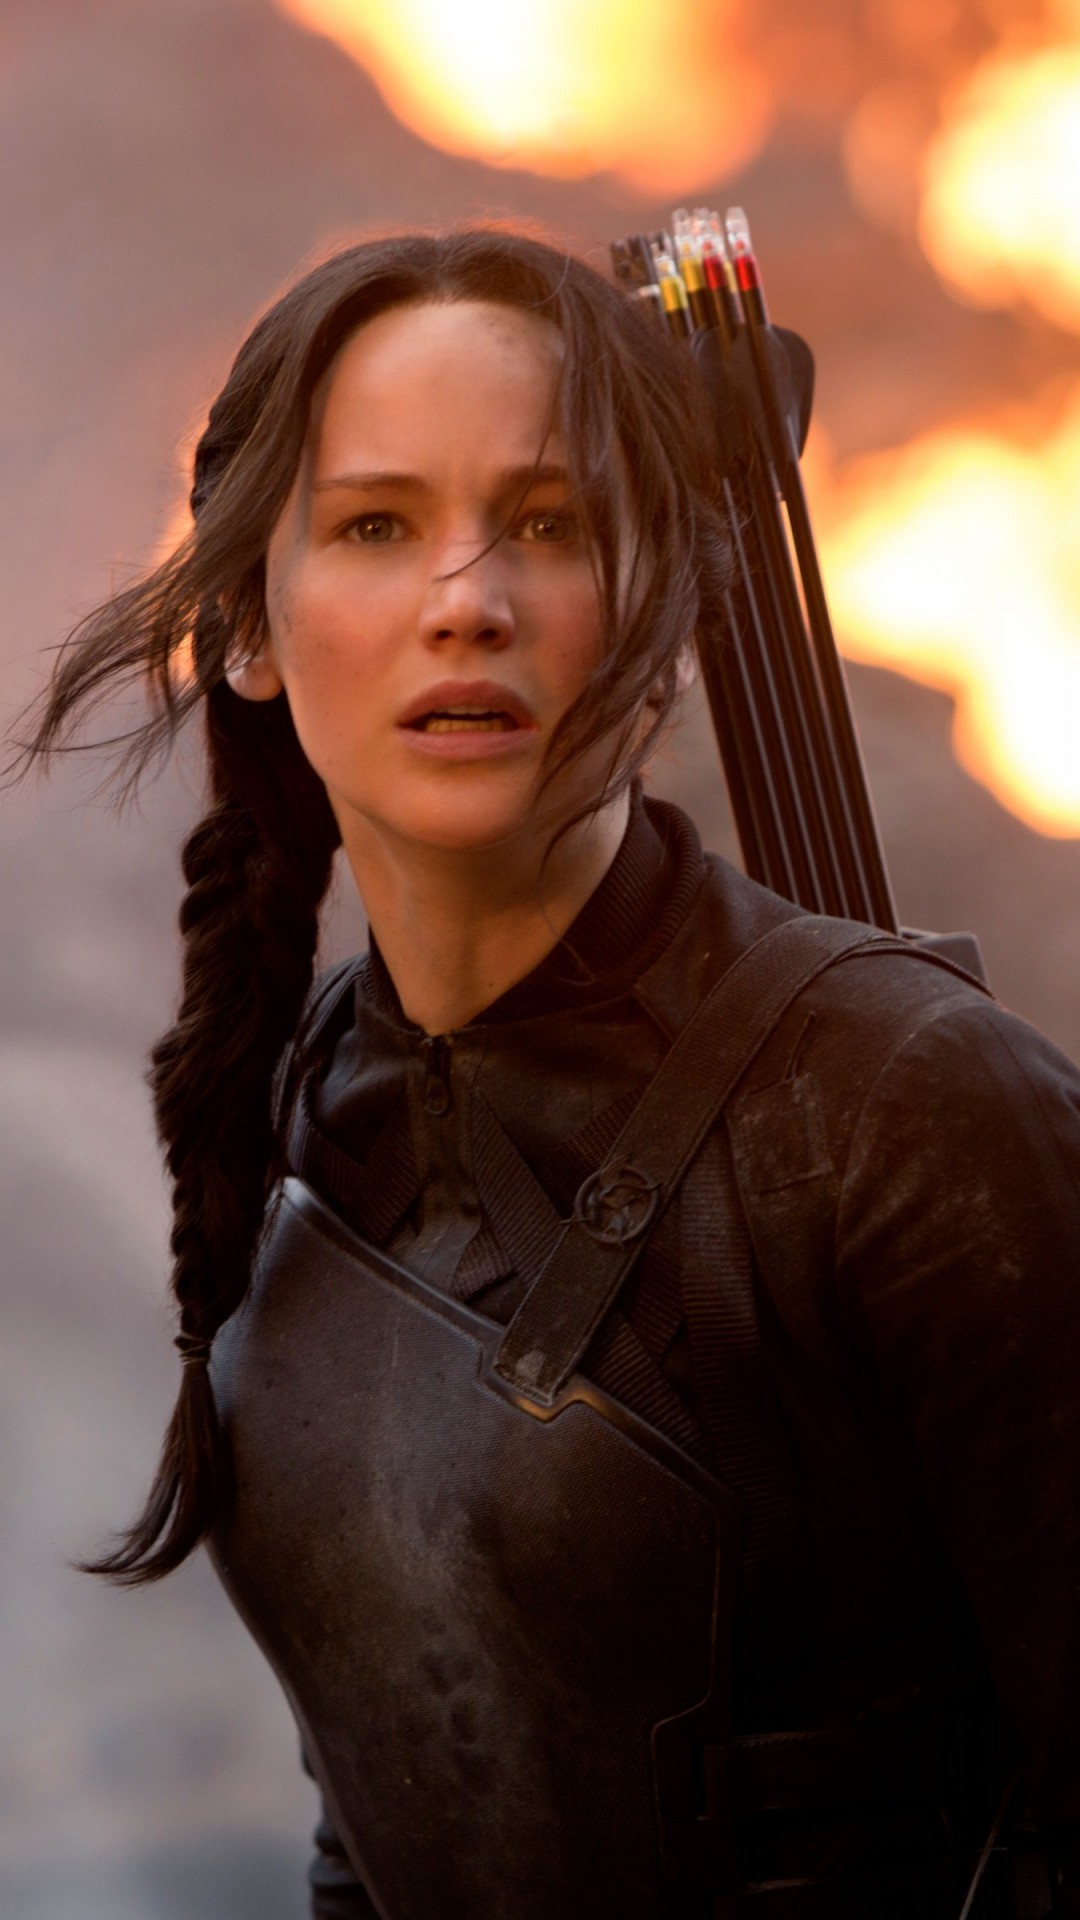 Jennifer Lawrence in The Hunger Games Wallpaper for SONY Xperia Z1